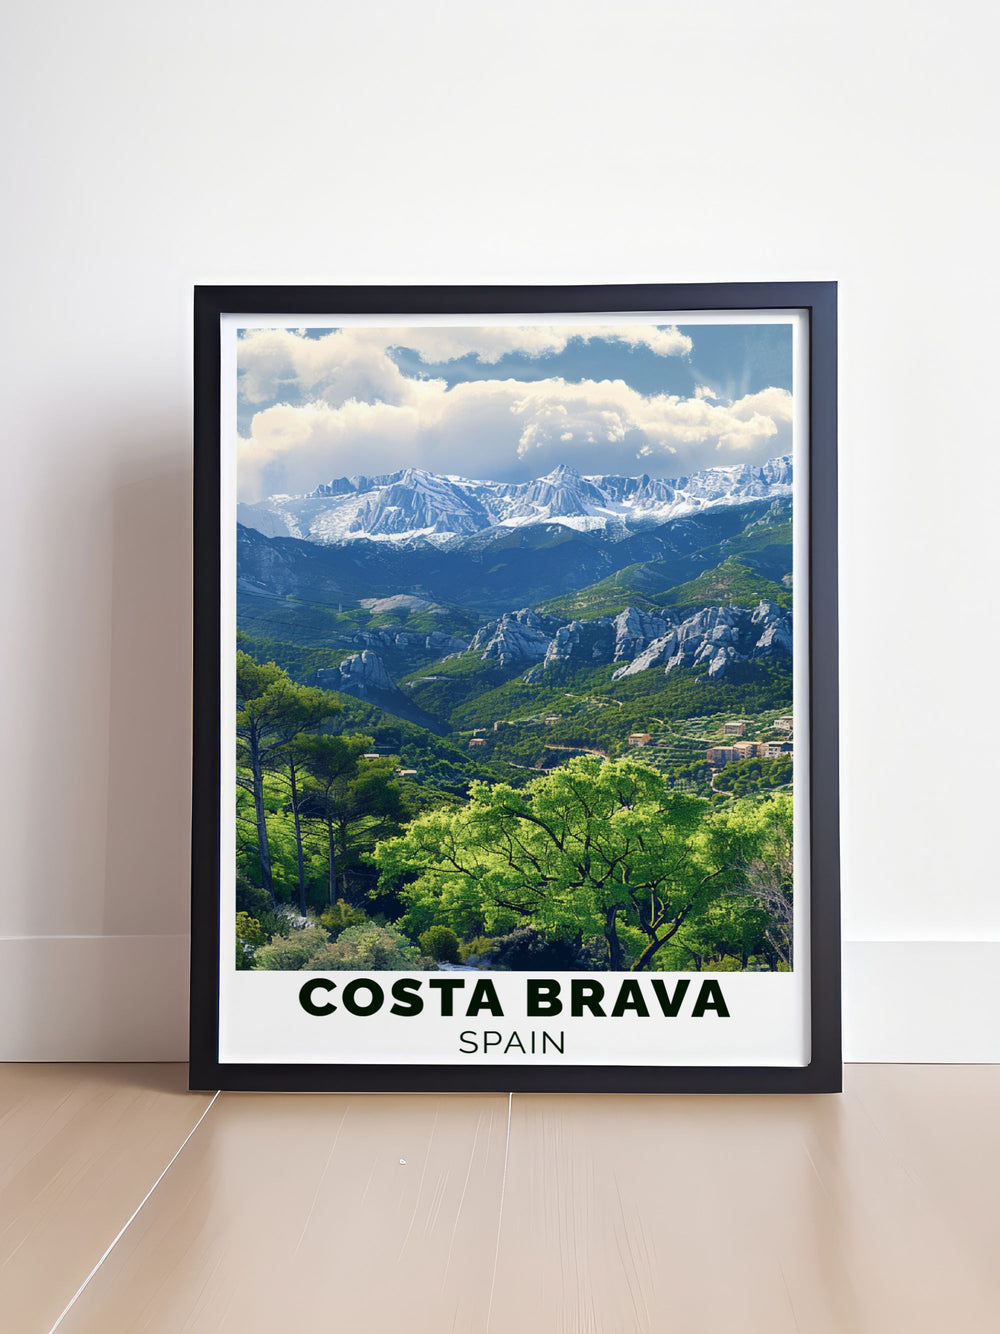 Immerse yourself in the serene environment of Costa Brava with a vibrant art print showcasing its rugged cliffs and crystal clear waters.